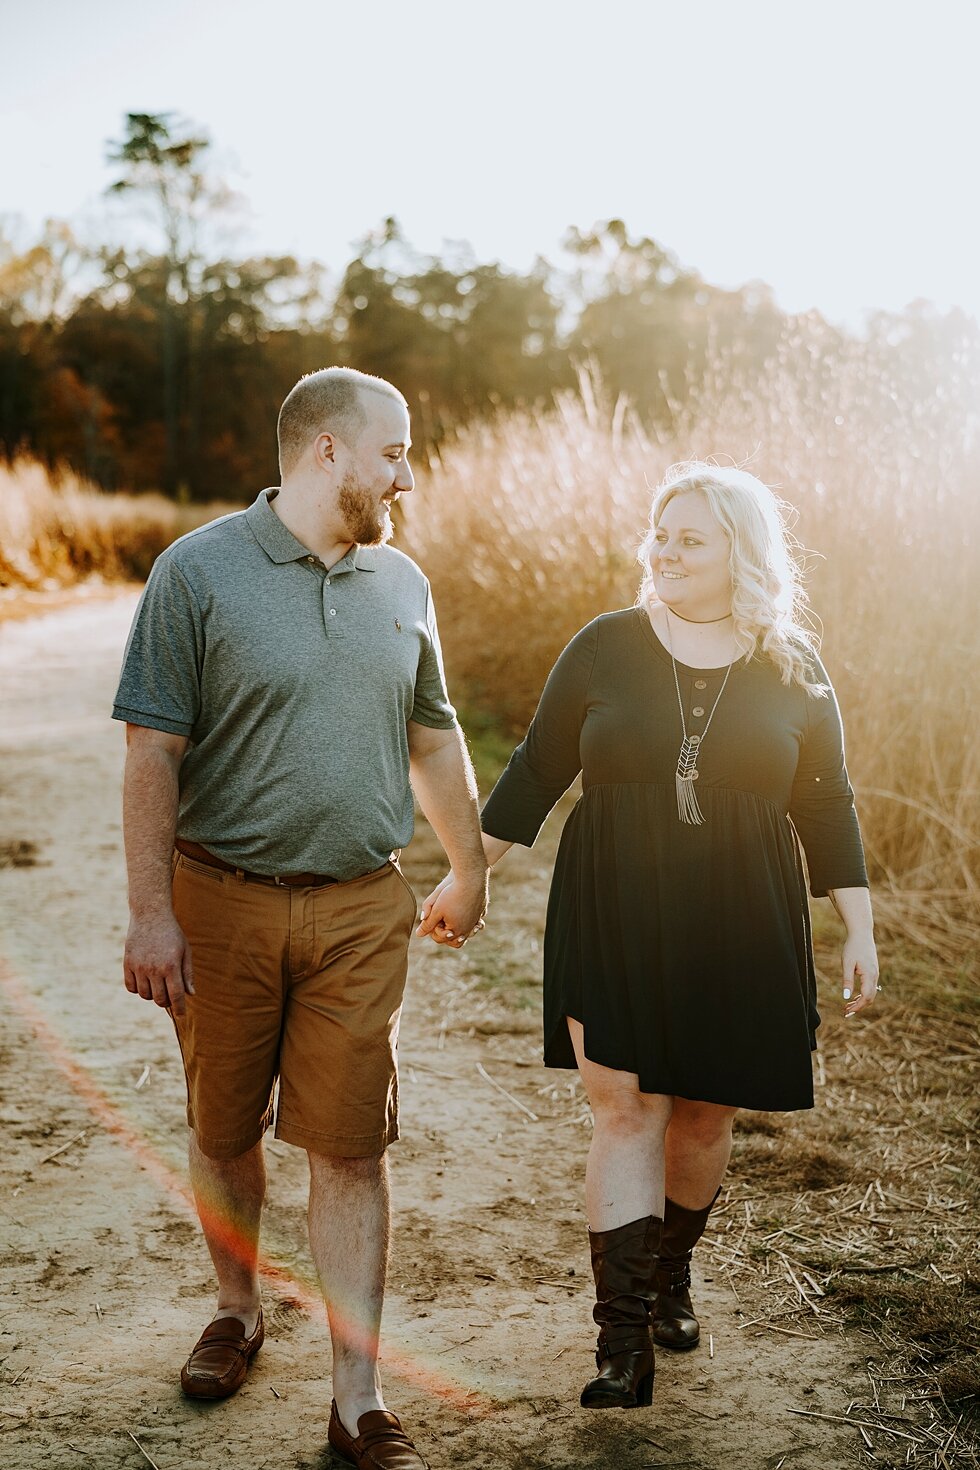  Lovely fall photo session with this engaged couple walking hand in hand #engagementgoals #engagementphotographer #engaged #outdoorengagement #kentuckyphotographer #indianaphotographer #louisvillephotographer #engagementphotos #savethedatephotos #sav